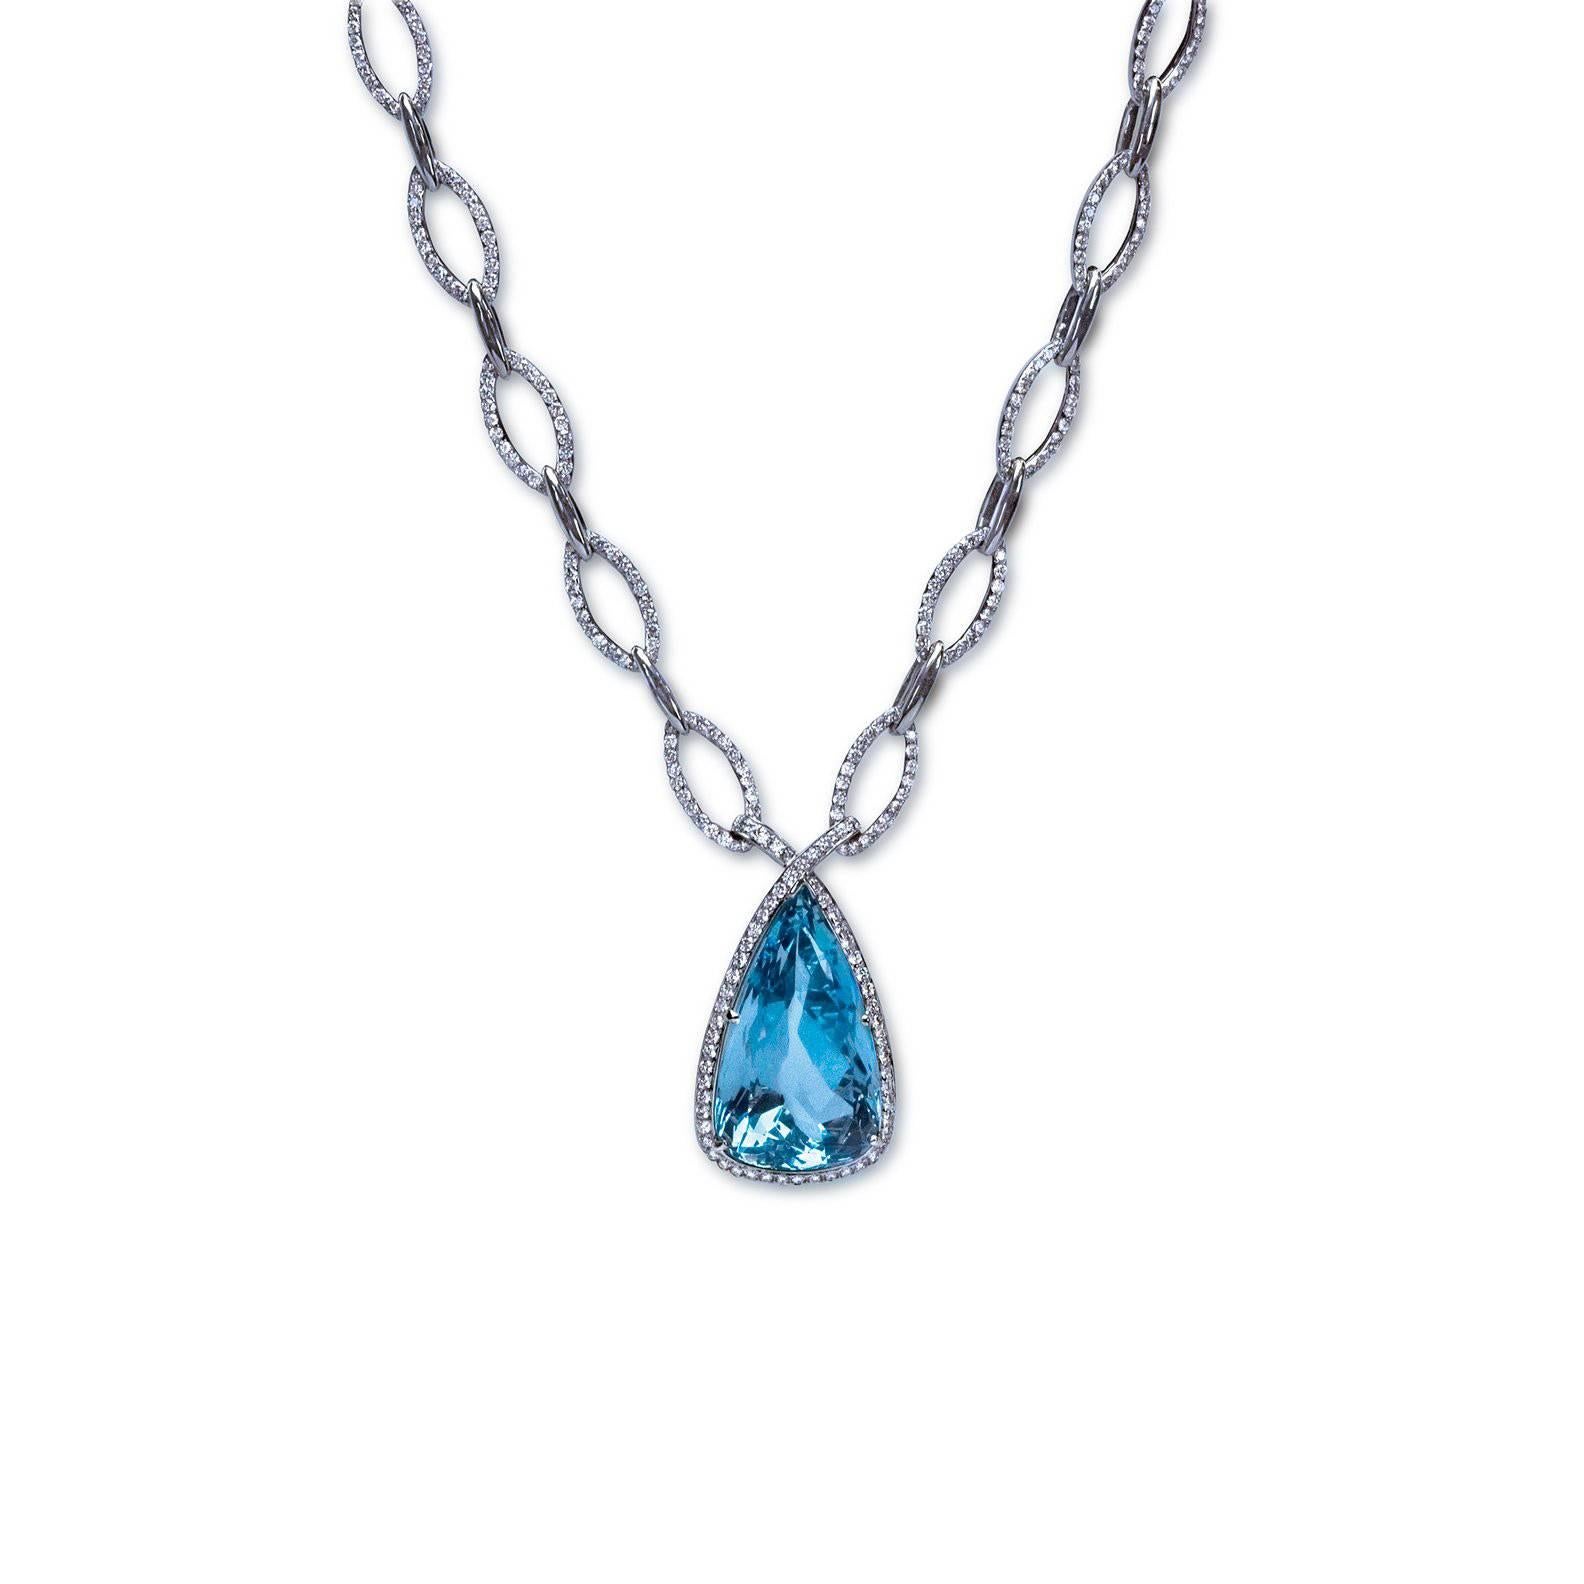 A "Samuel Getz" 18 Karat White Gold Necklace Featuring an Exceptional Pear Shape Aquamarine, 27.97 Carats [28.78 x 16.45 x 11.96 mm.] [Santa Maria] and 608 Round Brilliant Cut Diamonds, 6.38 Carats of E - F Color and VVS1 - VS1 Clarity.